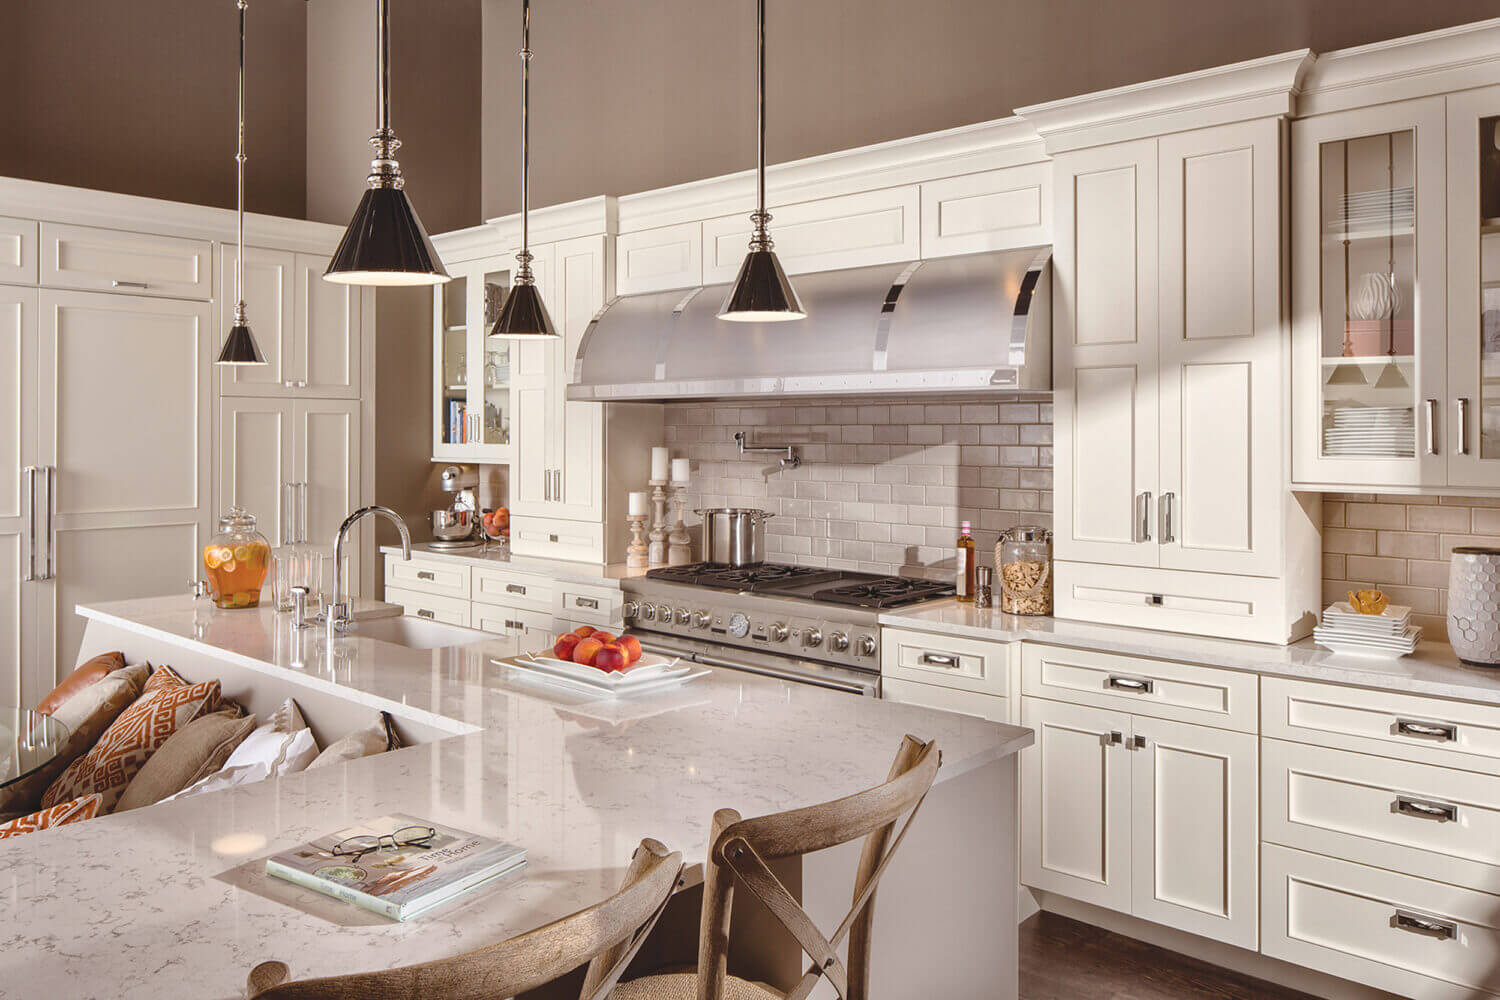 A beautiful L-shaped kitchen with an L-shaped kitchen island with a built-in breakfast nook integrated into the island.